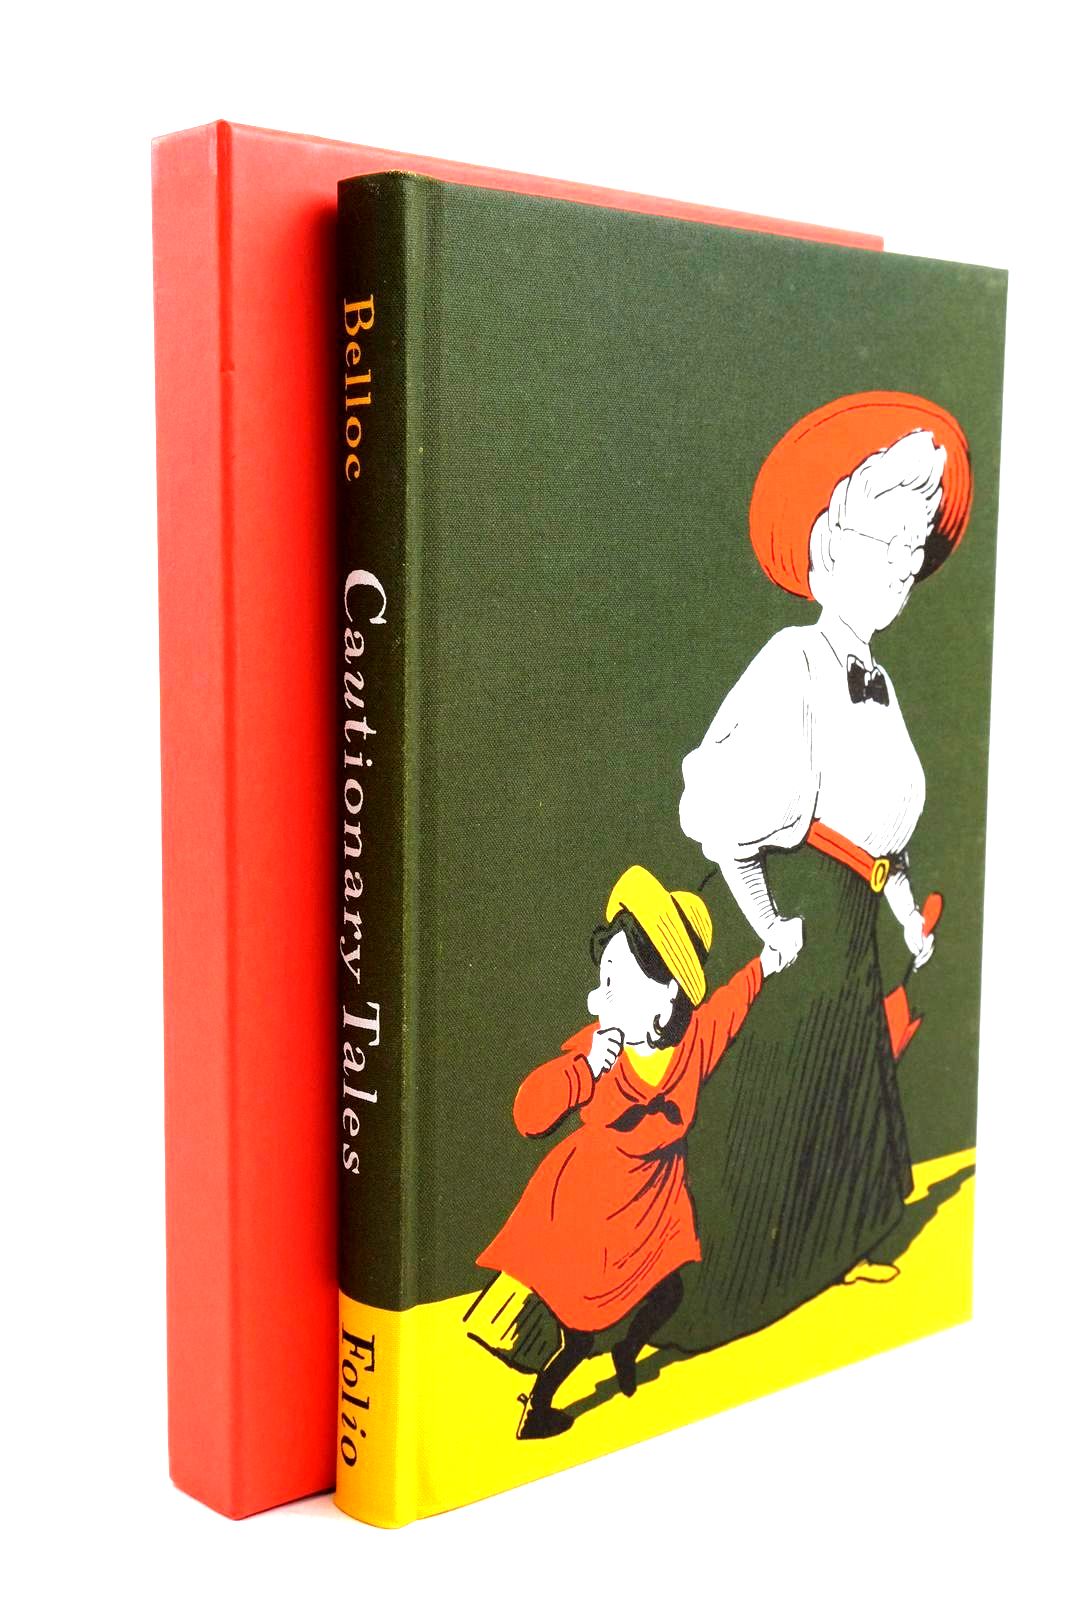 Photo of CAUTIONARY TALES AND OTHER VERSES written by Belloc, Hilaire illustrated by Simmonds, Posy published by Folio Society (STOCK CODE: 1320784)  for sale by Stella & Rose's Books